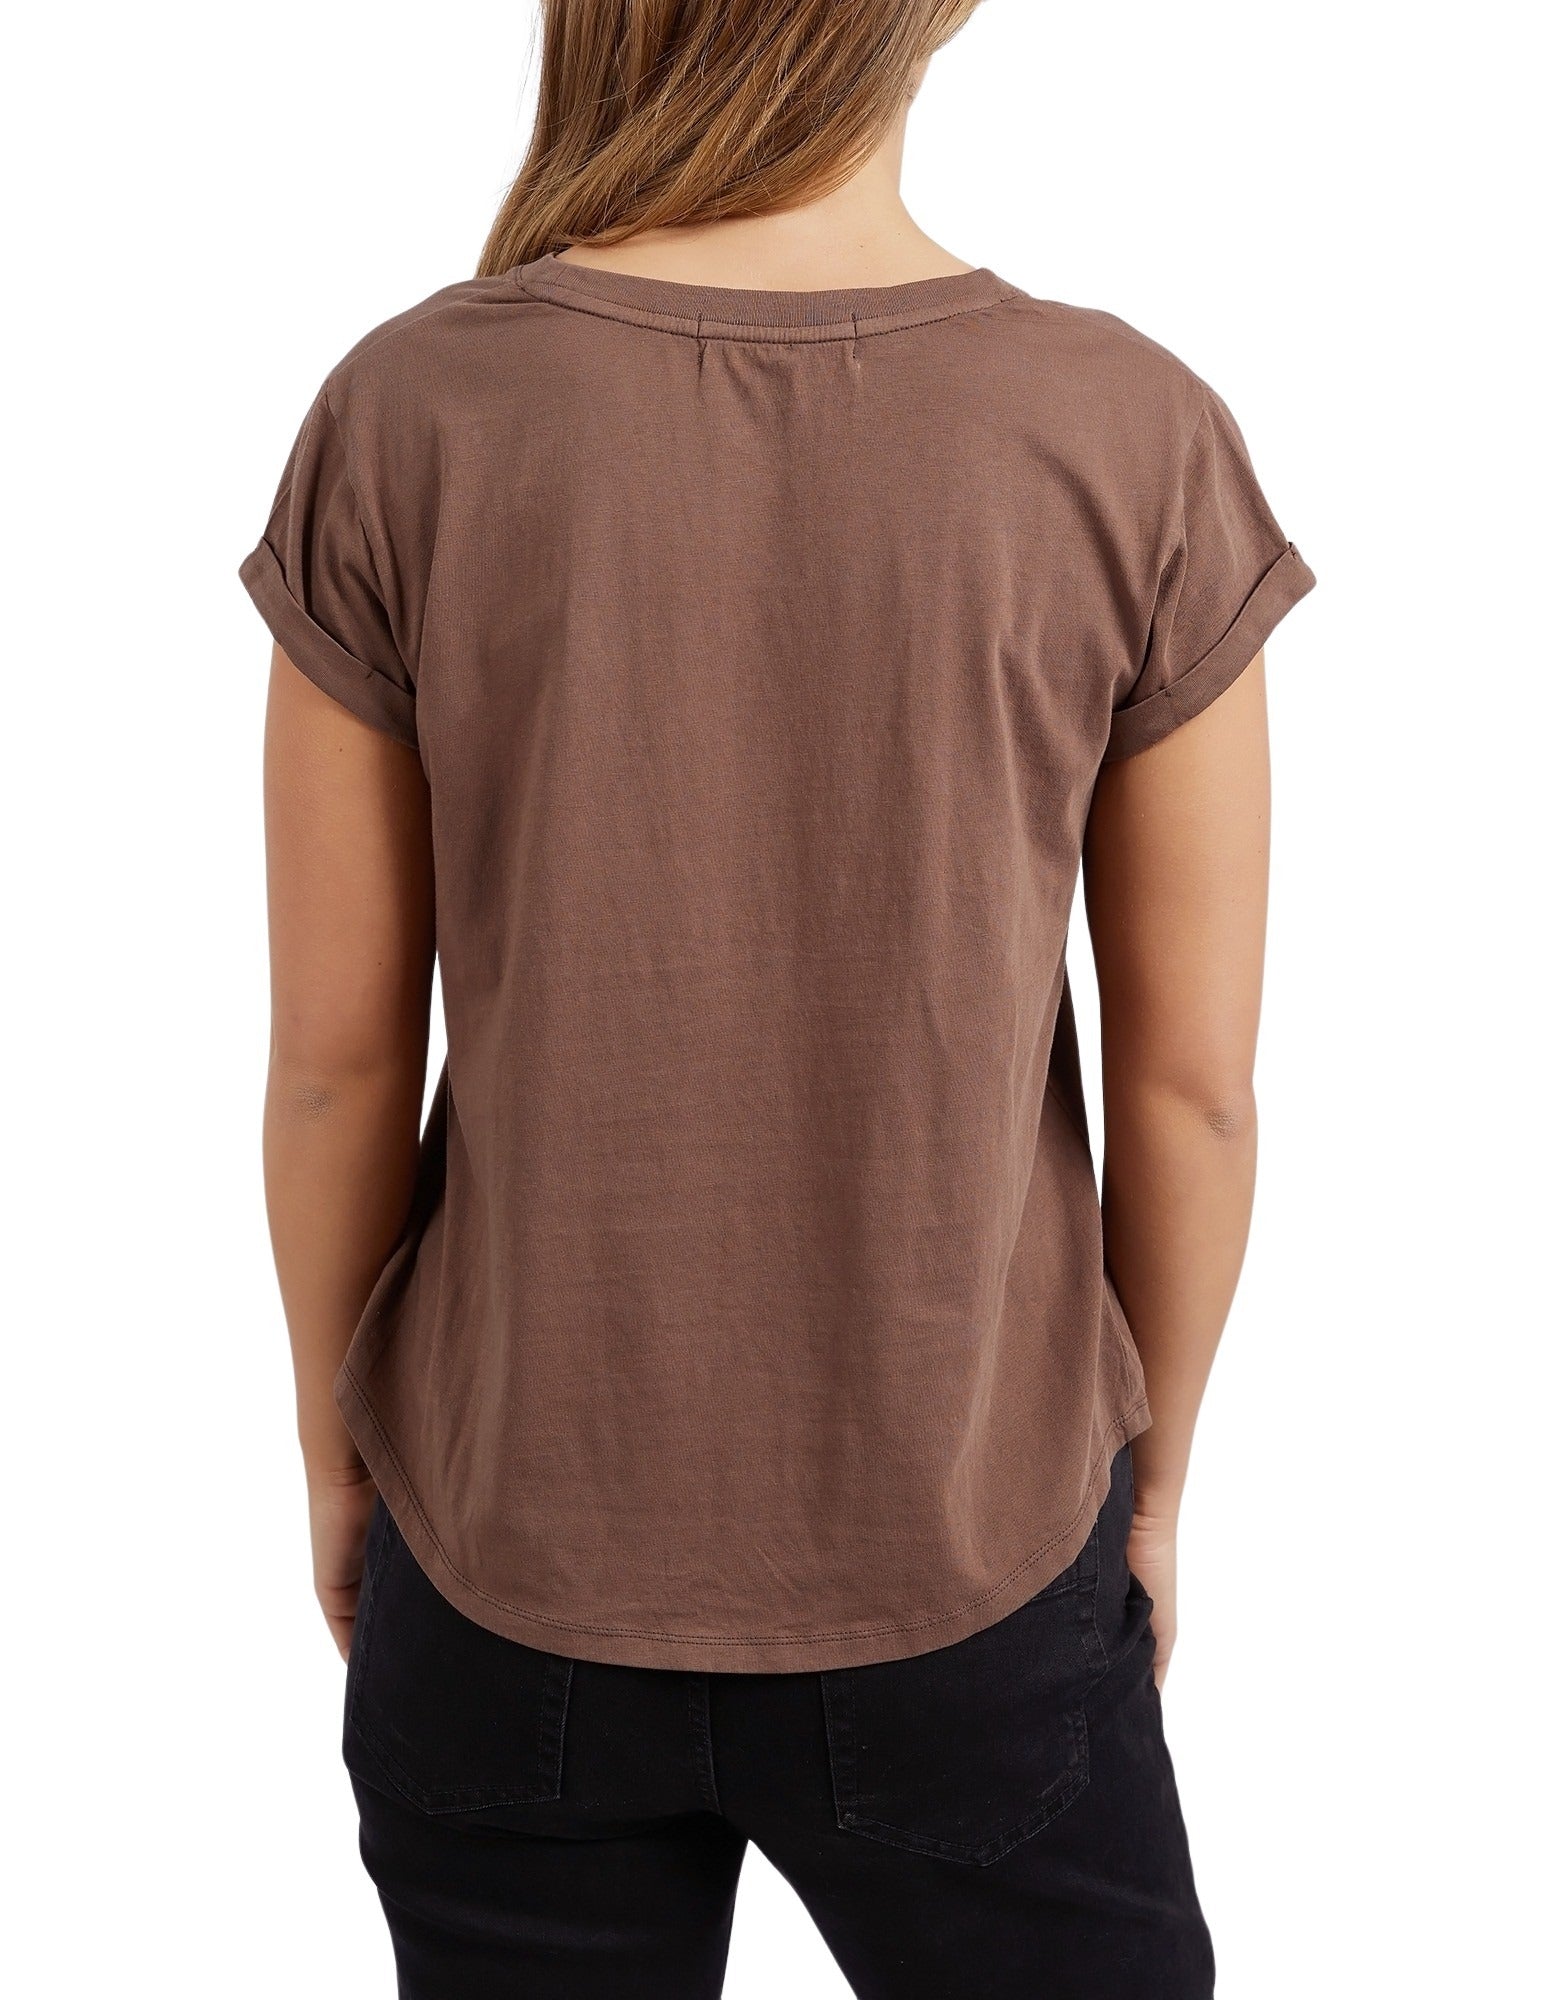 Foxwood Manly Tee - Chocolate